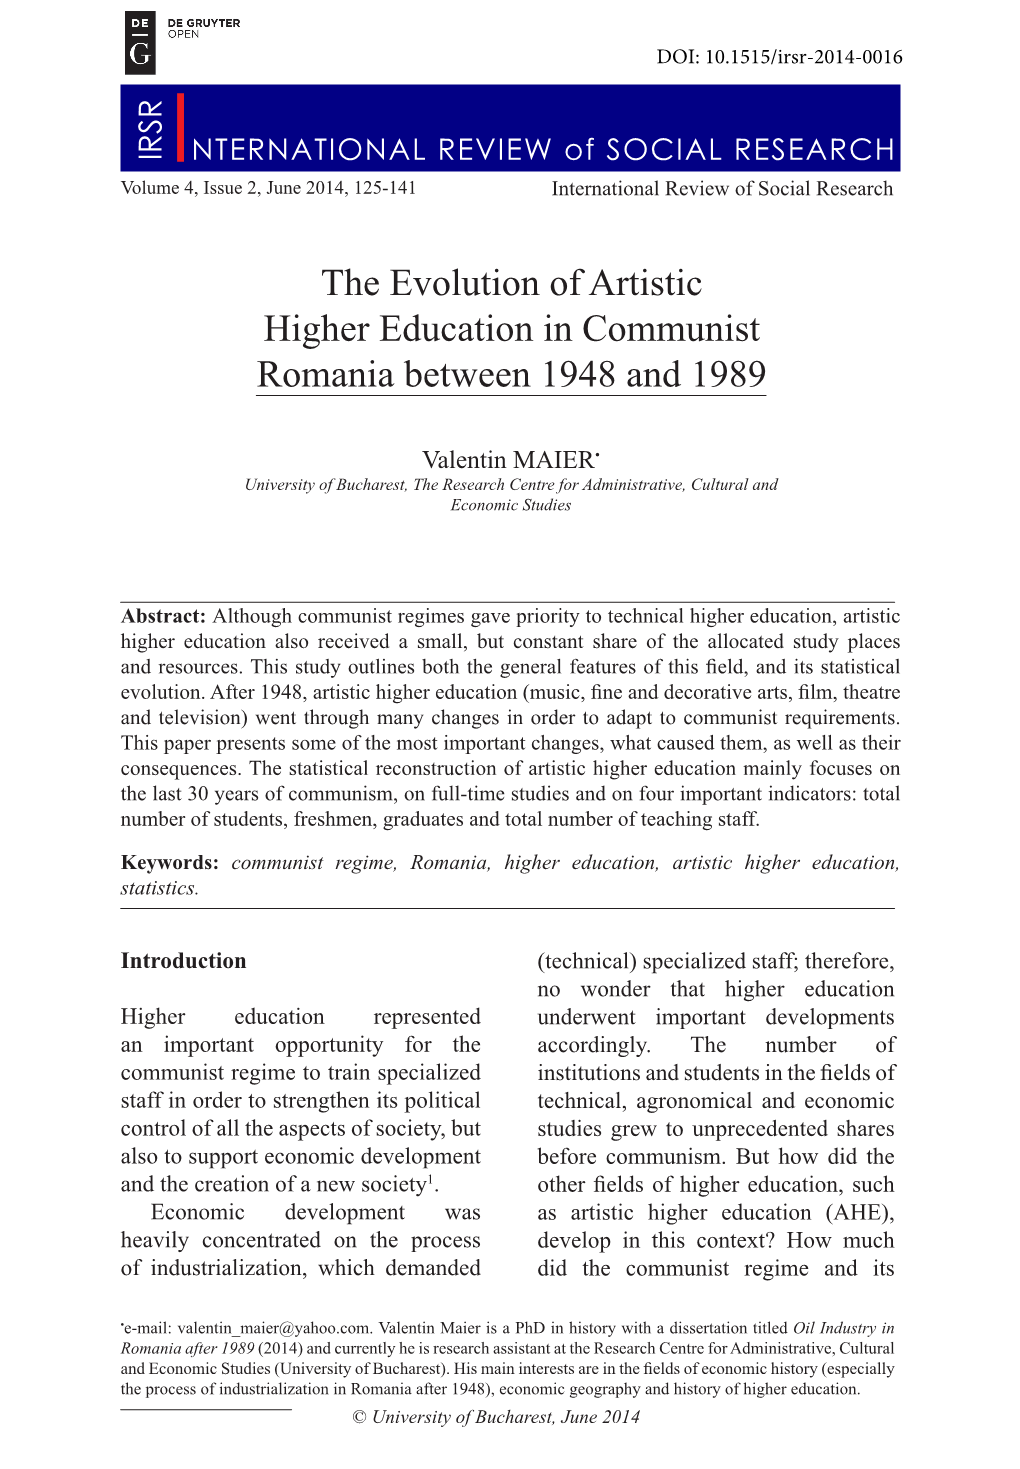 The Evolution of Artistic Higher Education in Communist Romania Between 1948 and 1989